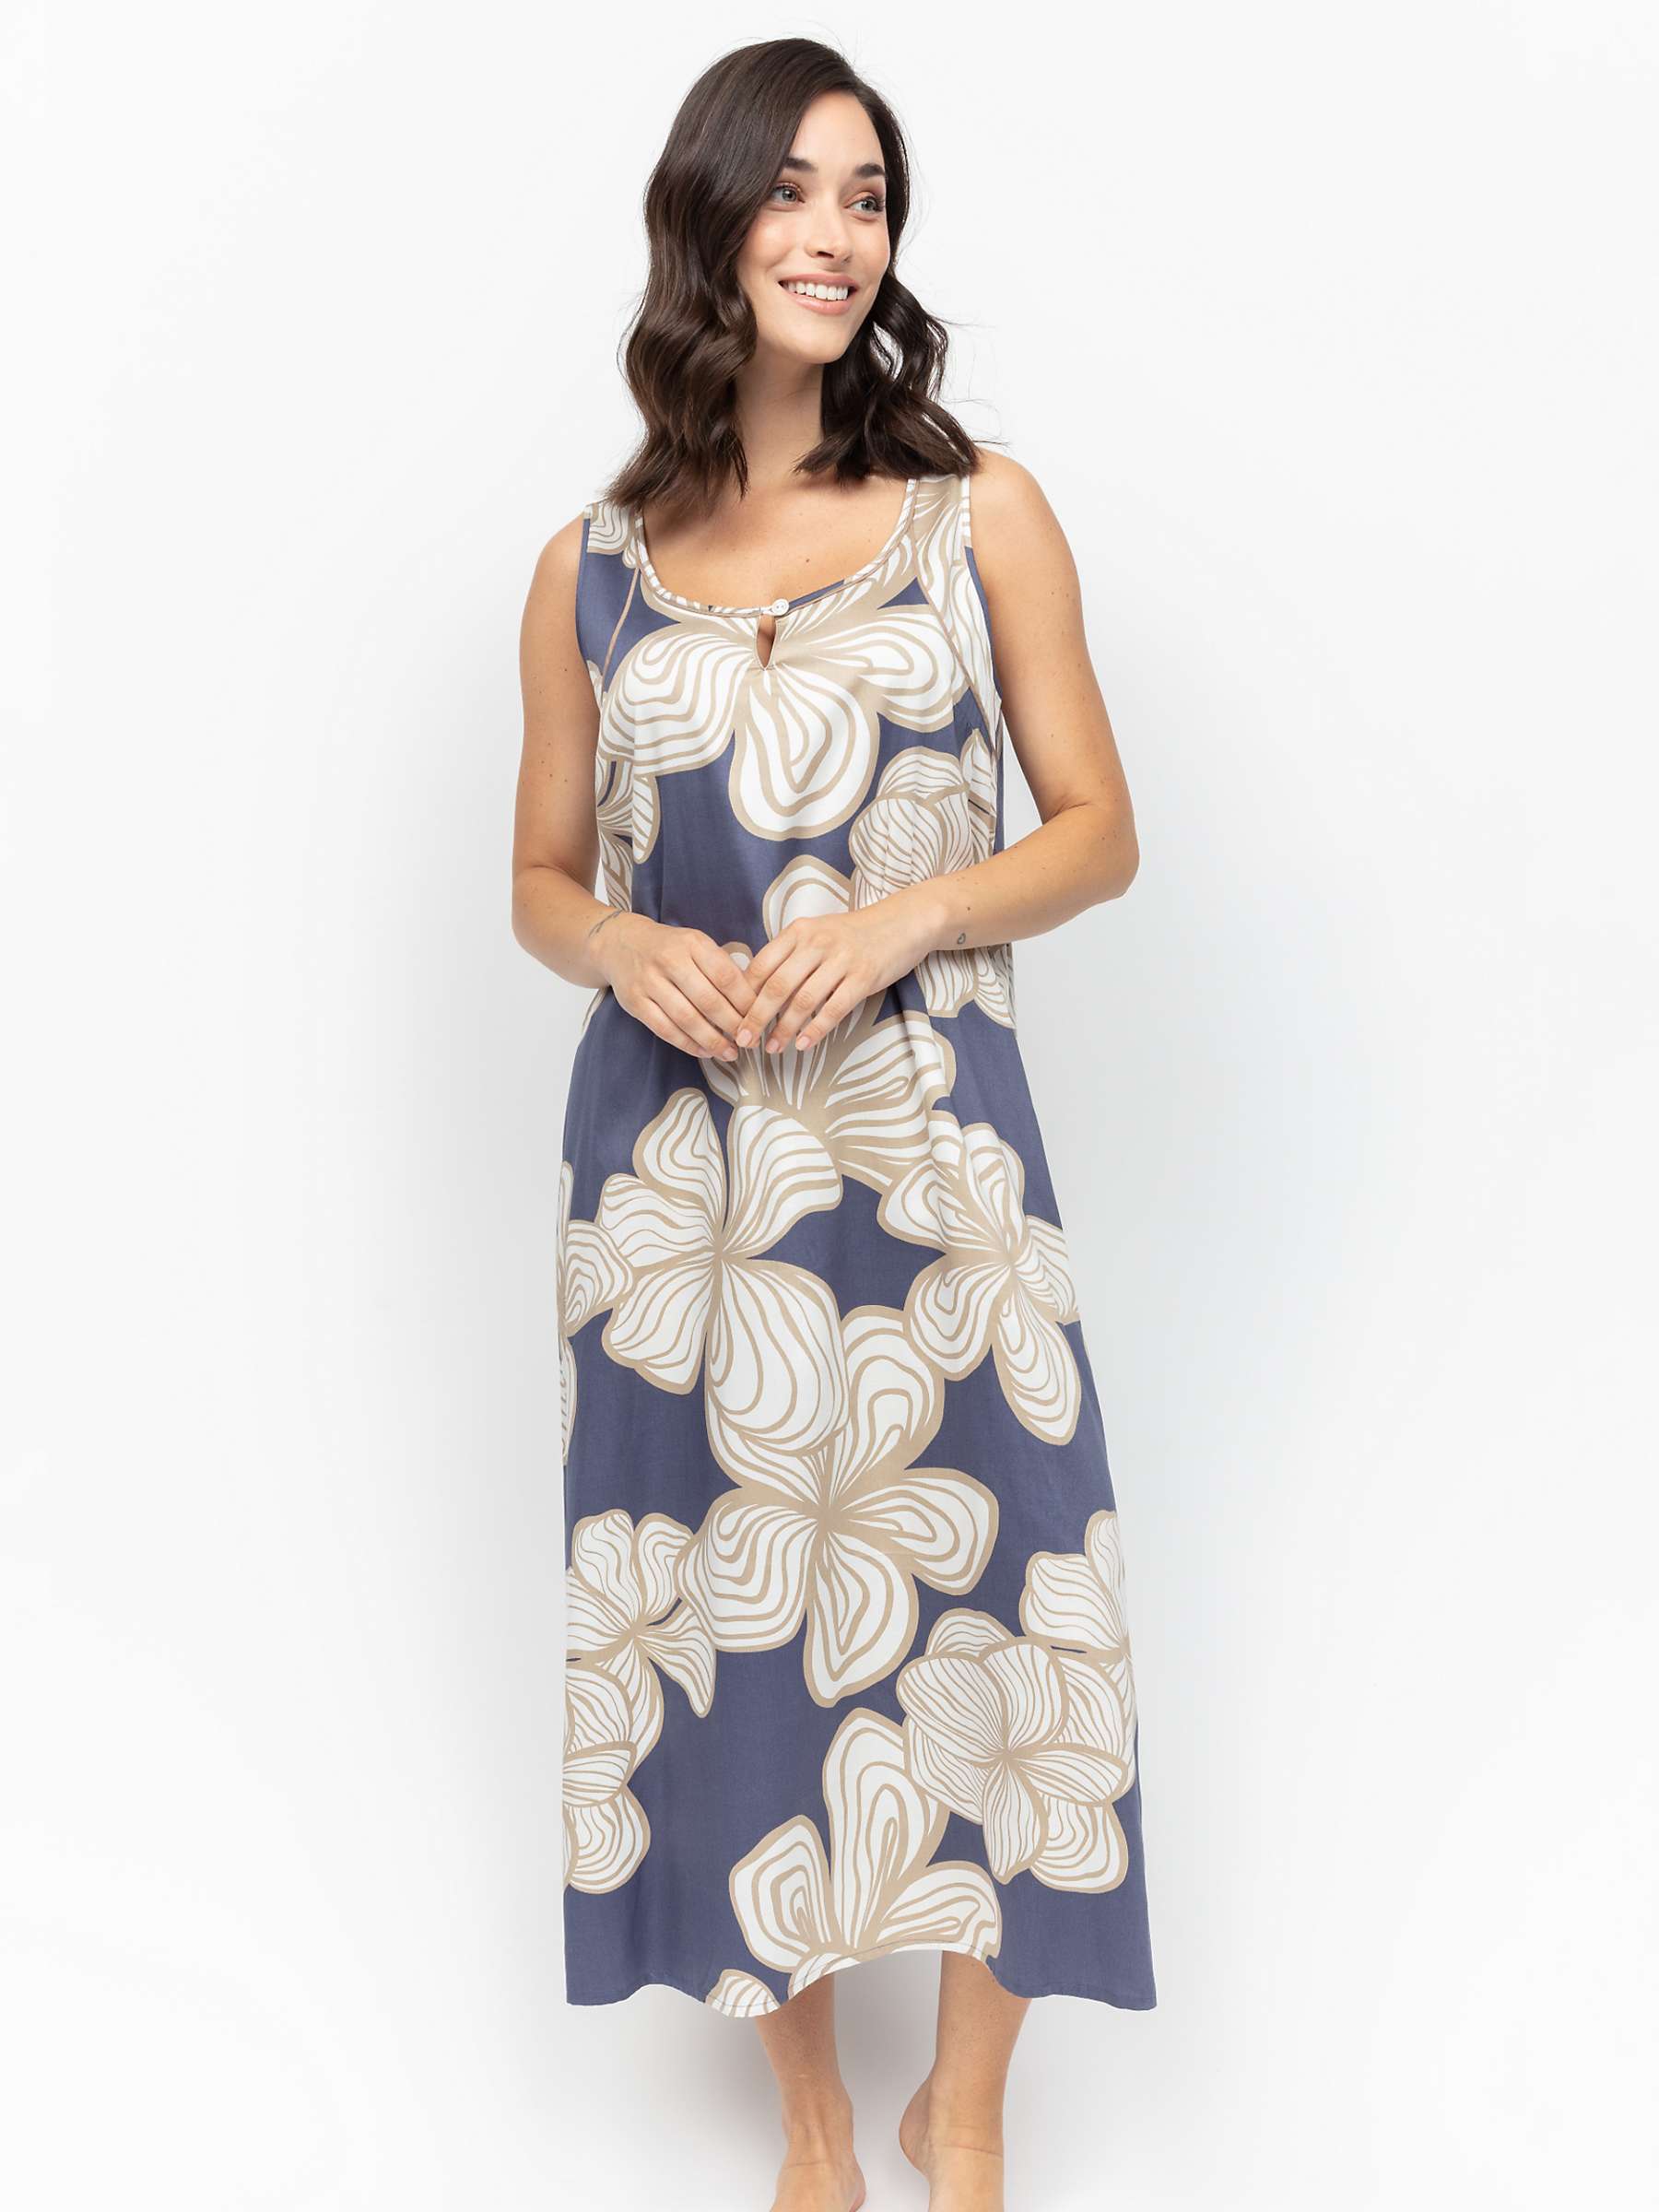 Buy Fable & Eve Hyde Park Floral Print Long Nightdress, Slate Blue Online at johnlewis.com